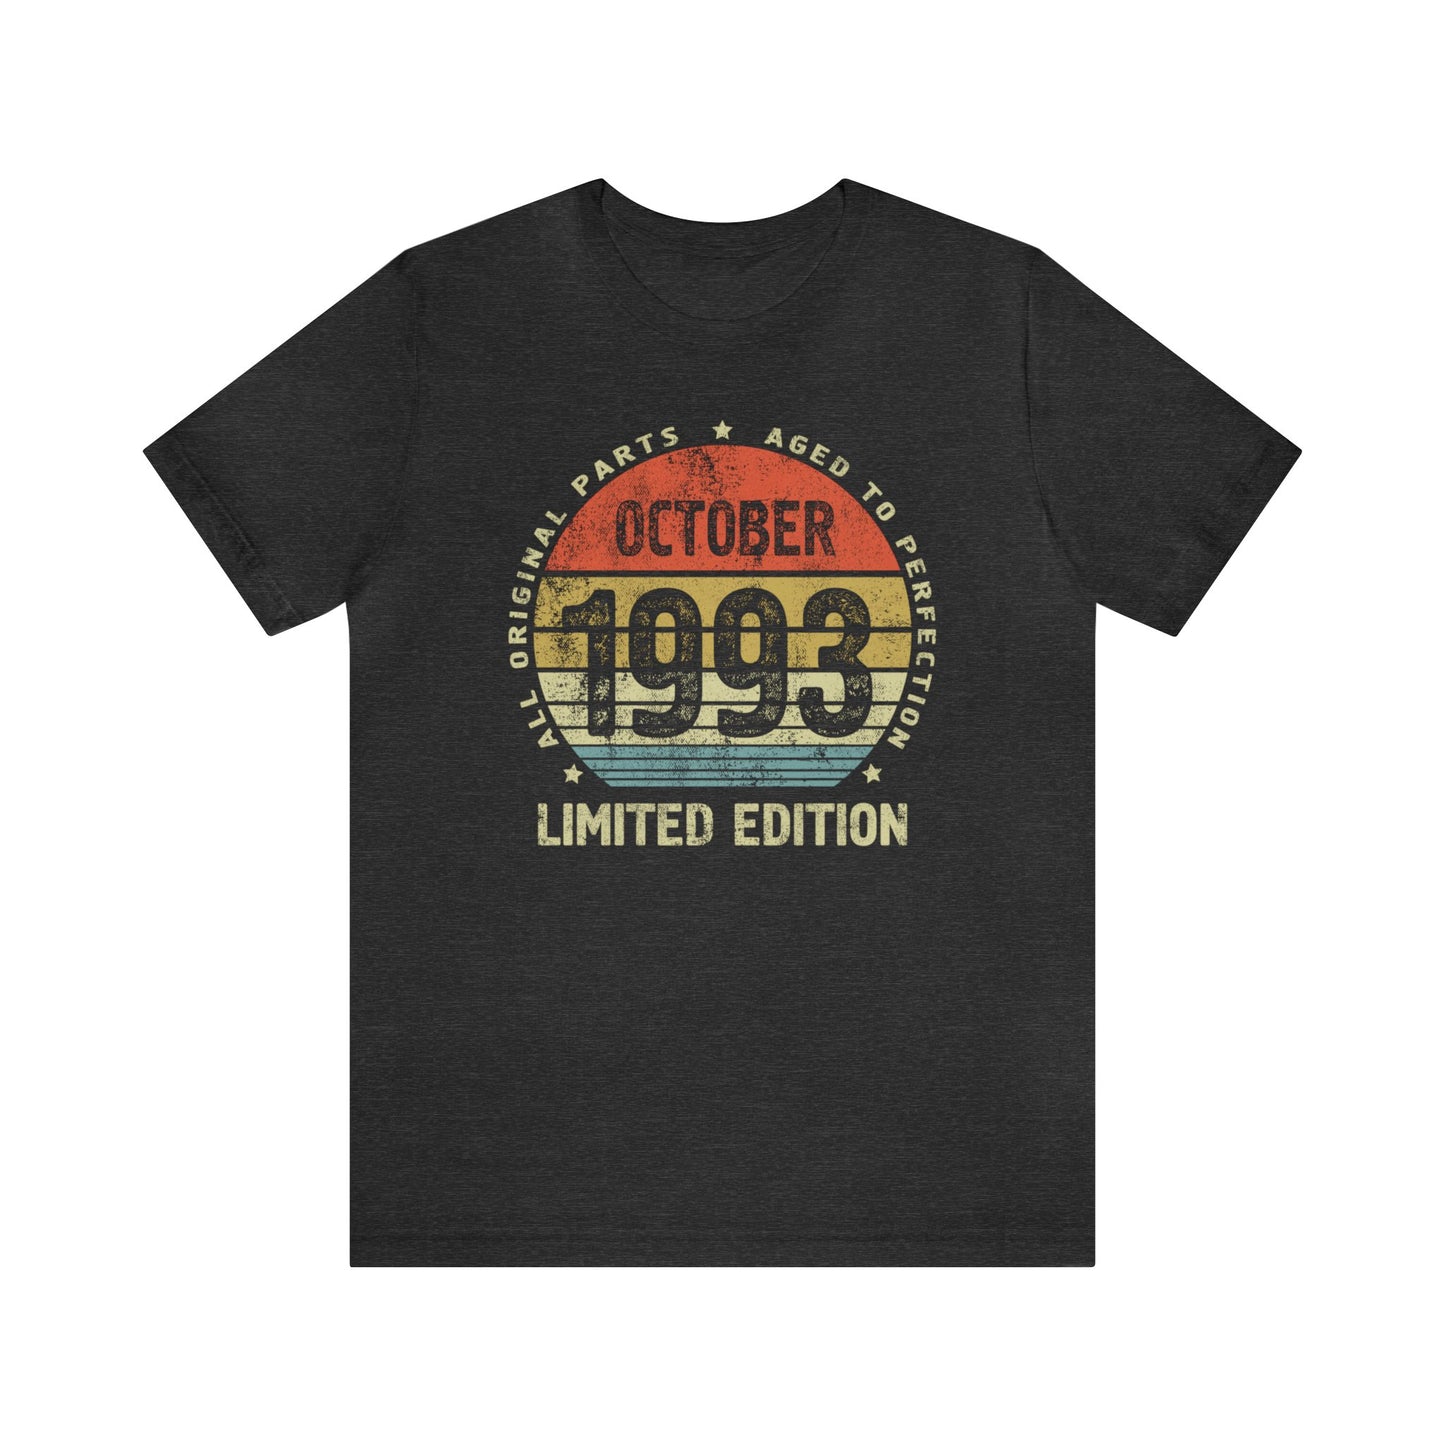 30th birthday gift for men or women October 1993 birthday shirt for wife or husband